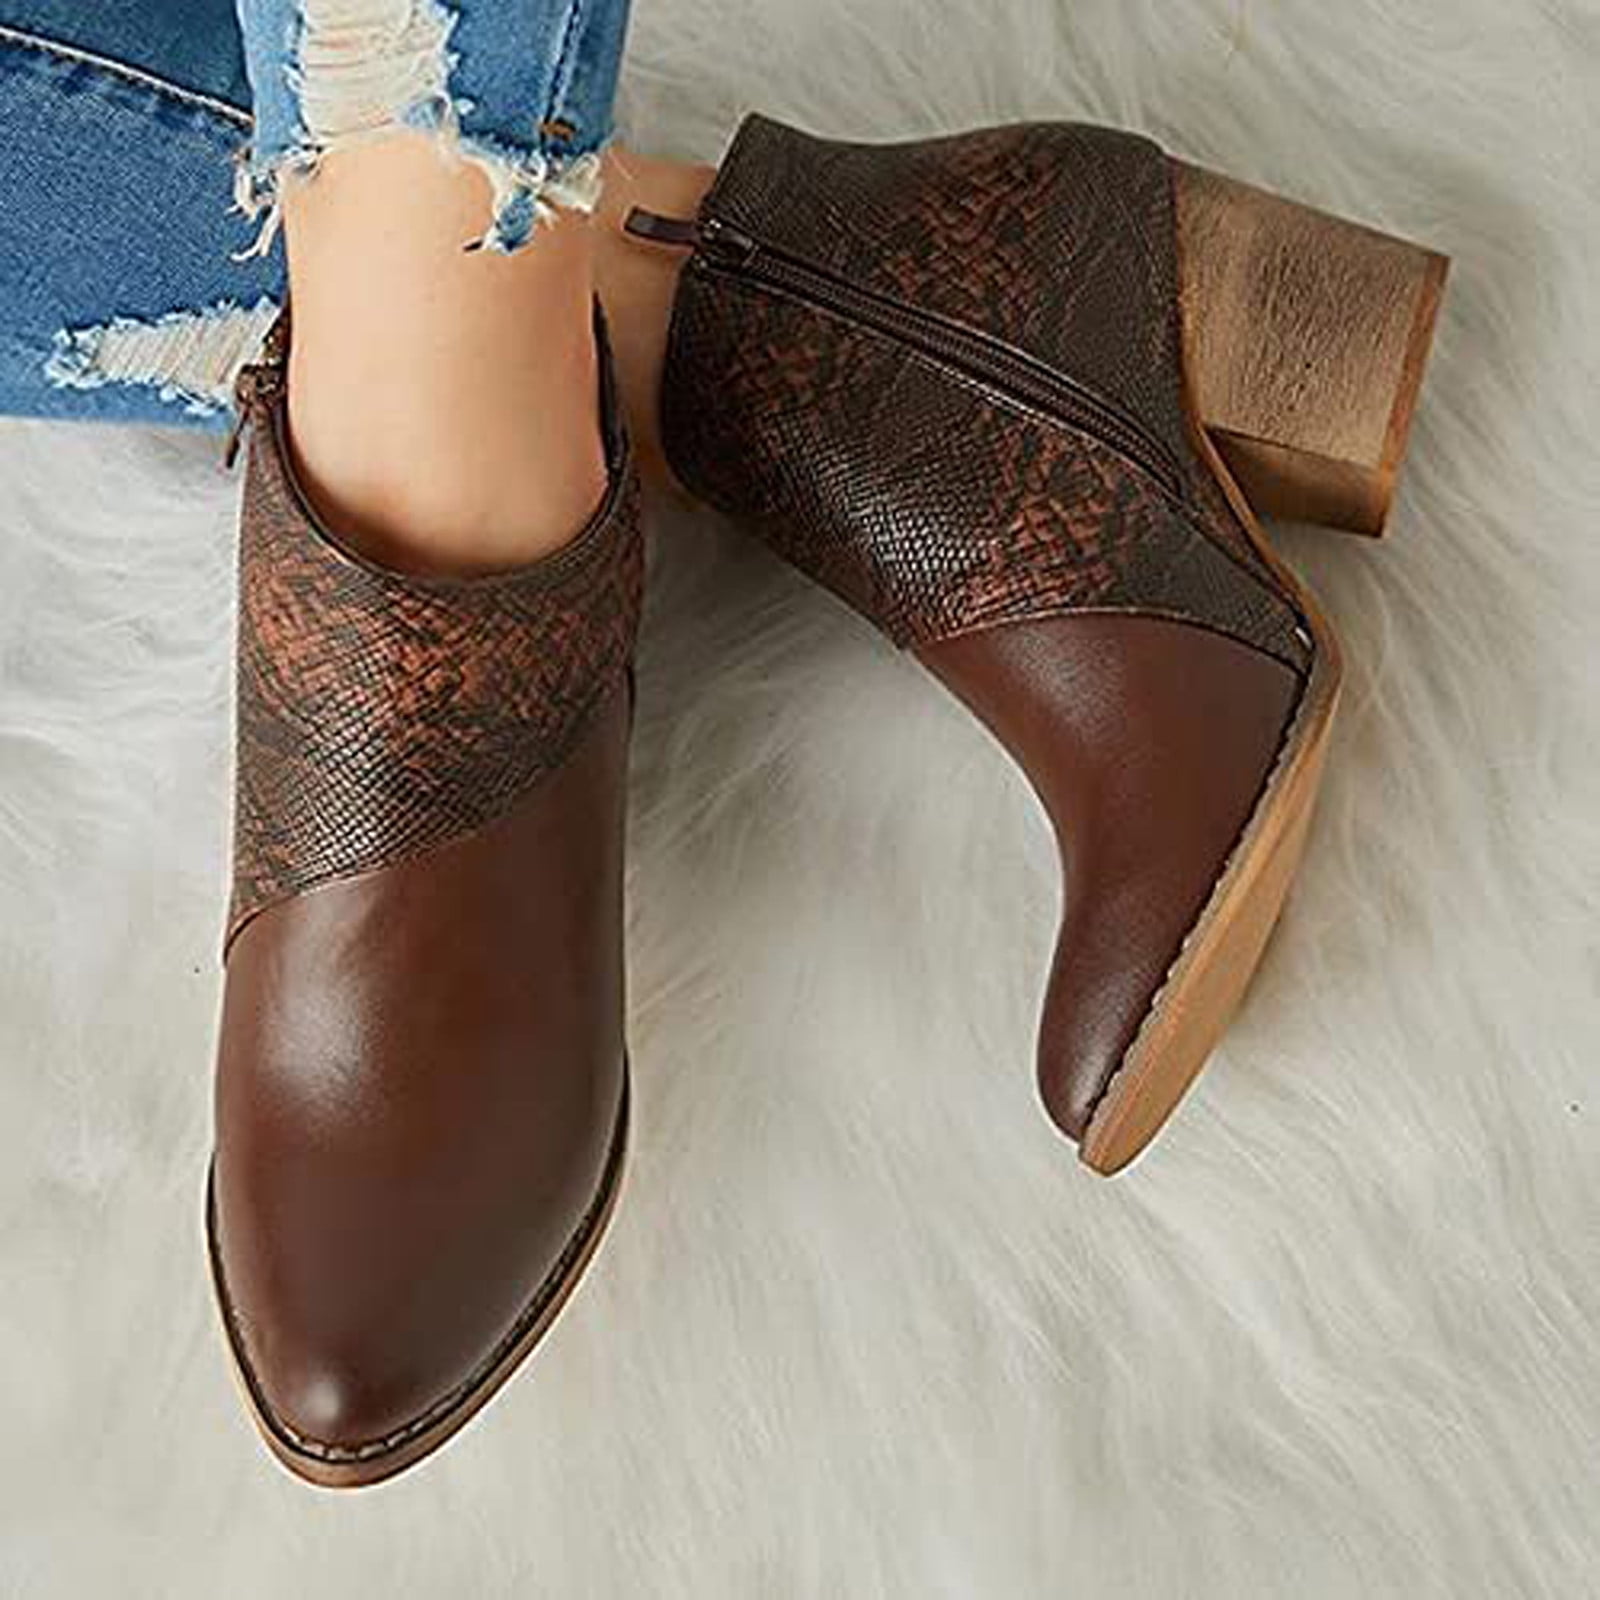 Womens Lace Up Riding Boots Comfy Faux Leather Fashion Patchwork Square Toe Mid-Calf Boot Shoes for Women Medium Chunky Heel Booties Side Zipper 